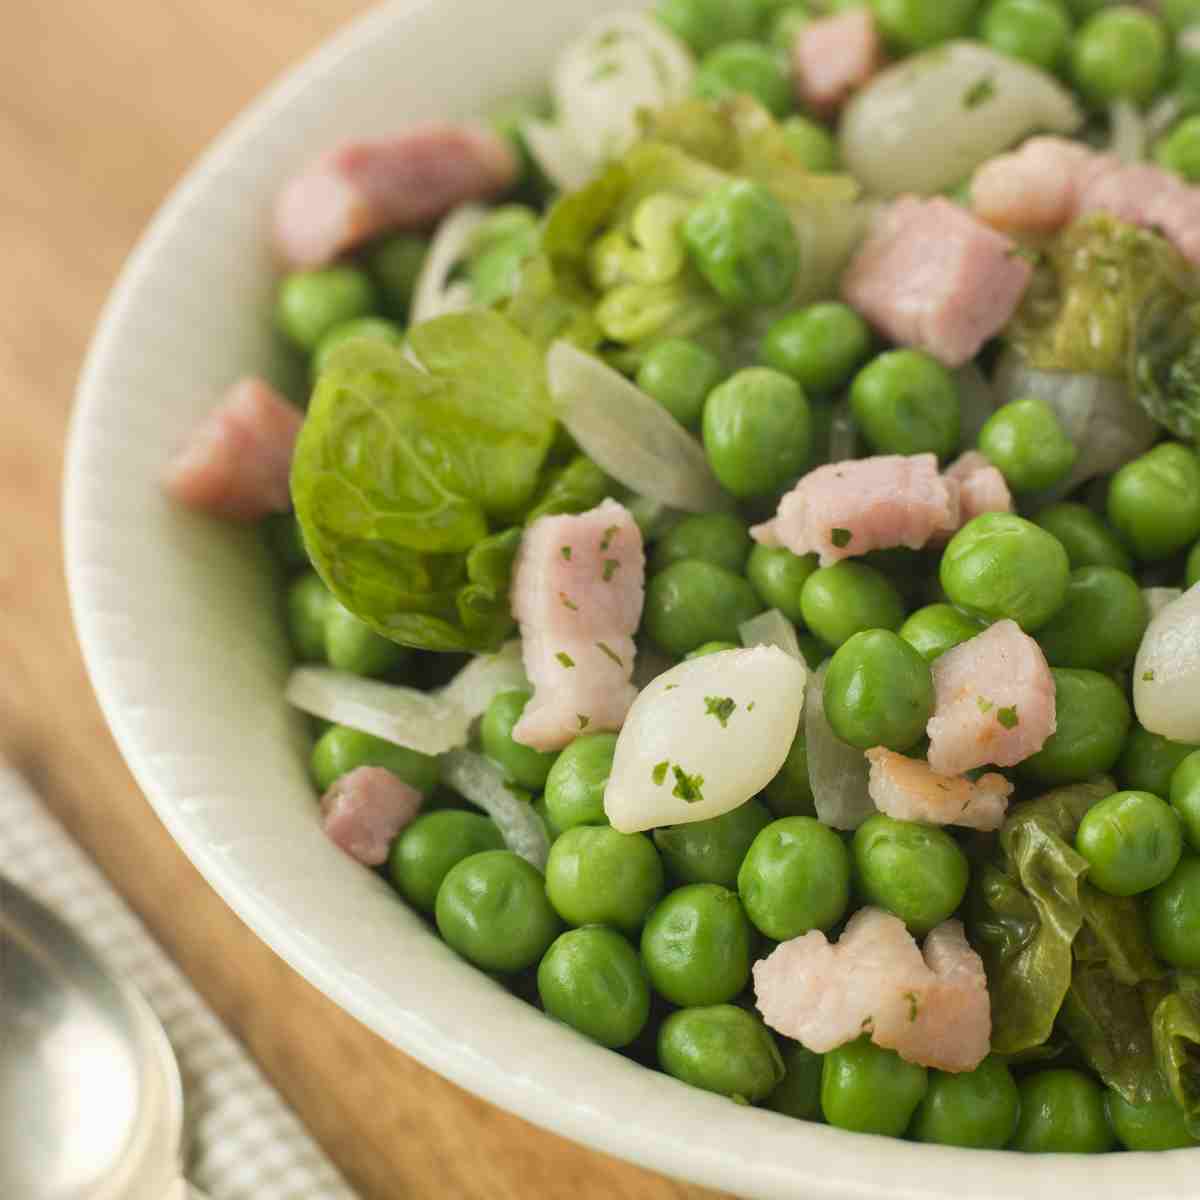 A white bowl filled with green peas with bits of lettuce, onion, and pale pink bacon.